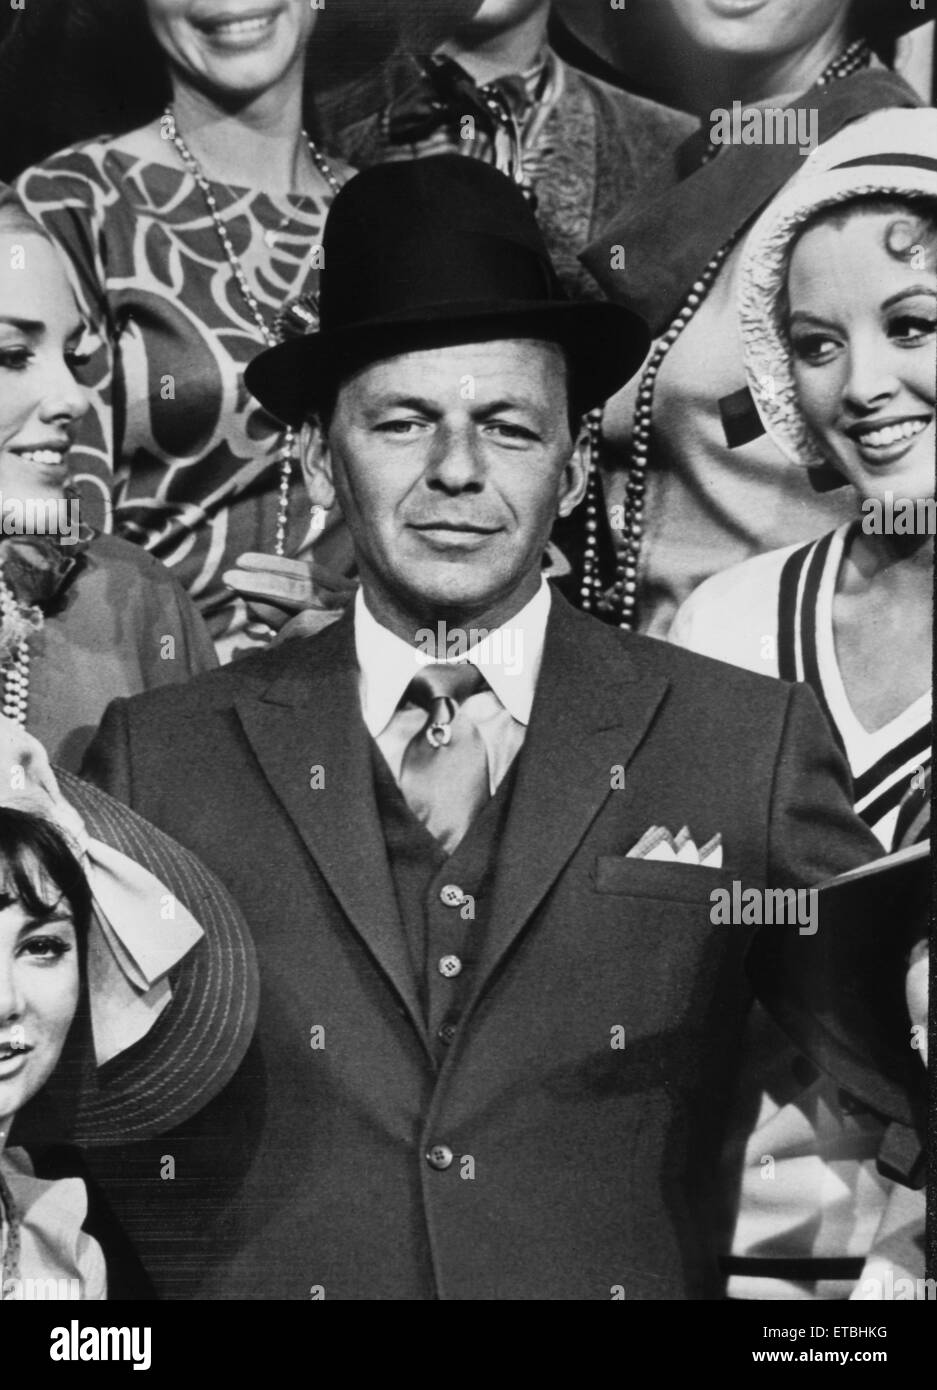 Frank Sinatra, Publicity Portrait from the Film 'Robin and the 7 Hoods', 1964 Stock Photo